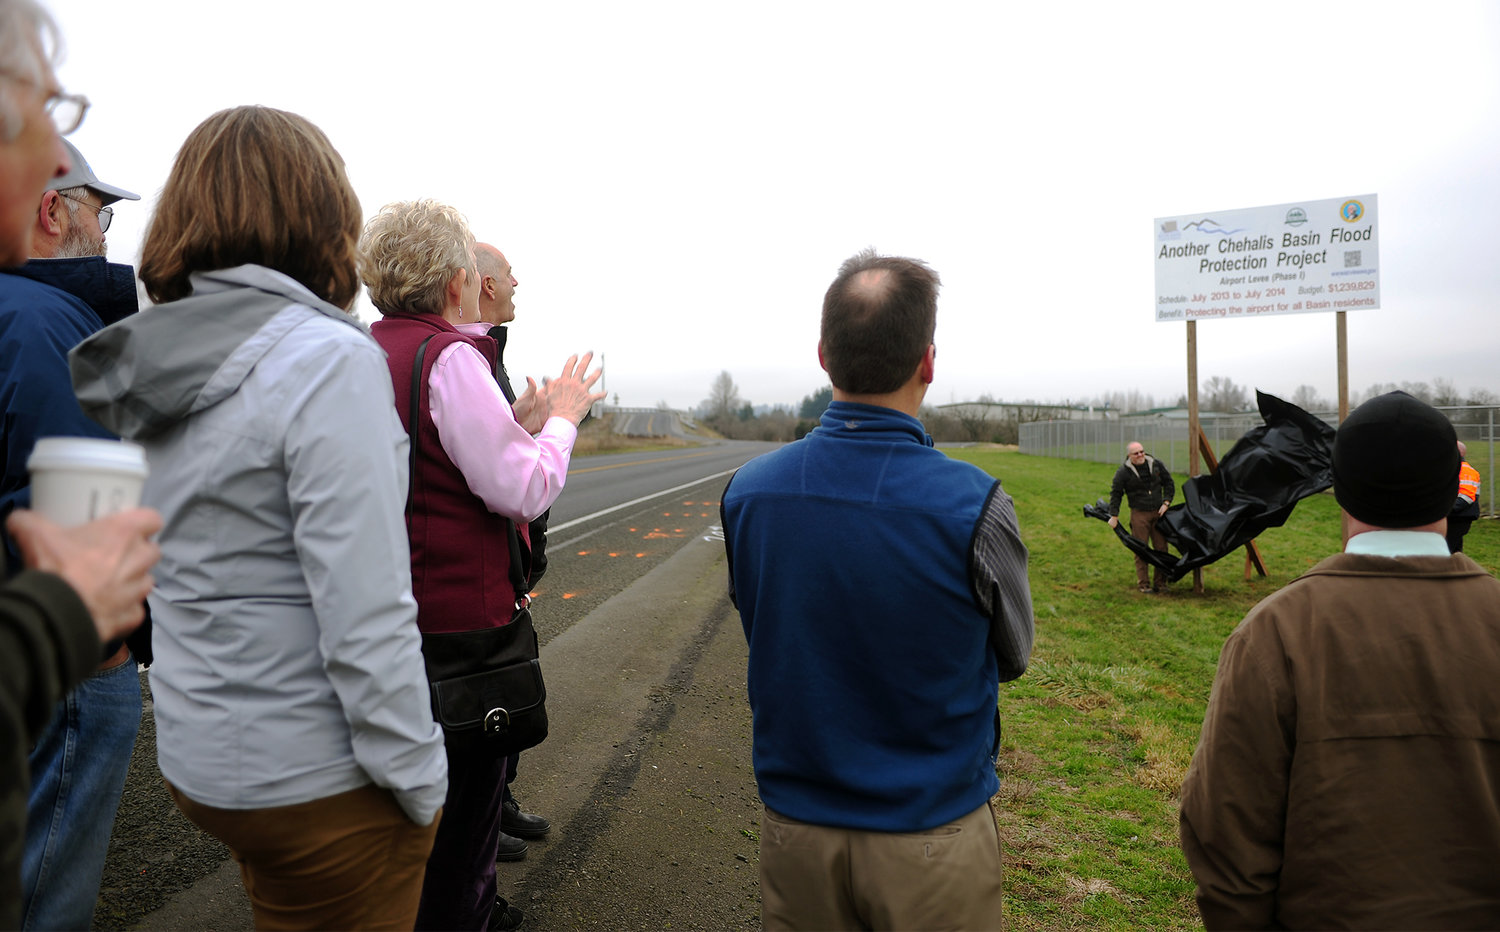 Members of the Chehalis River Basin Flood Authority work group look on as Lewis County Public Works employees unveil a new sign next to the Airport that explains where people's tax dollars are going to help flood prevention in January in Chehalis.